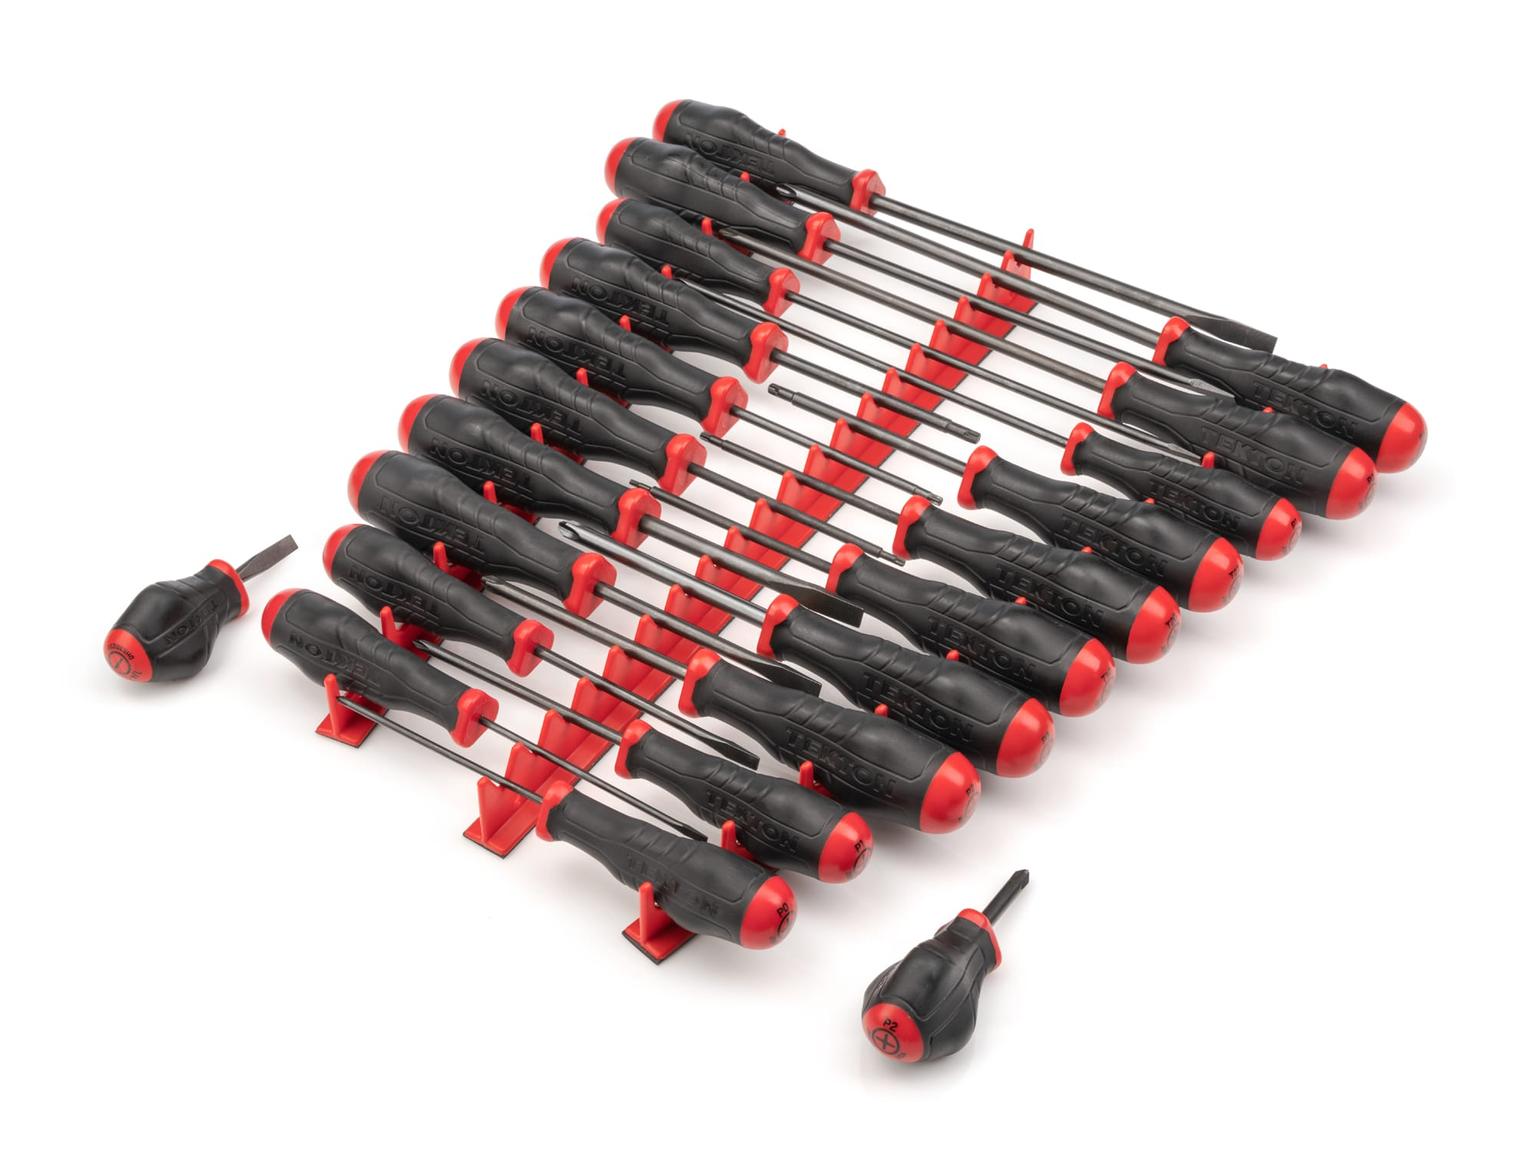 TEKTON DRV41502-T High-Torque Black Oxide Blade Screwdriver Set, 22-Piece (#0-#3, 1/8-5/16 in., T10-30) with Red Rails